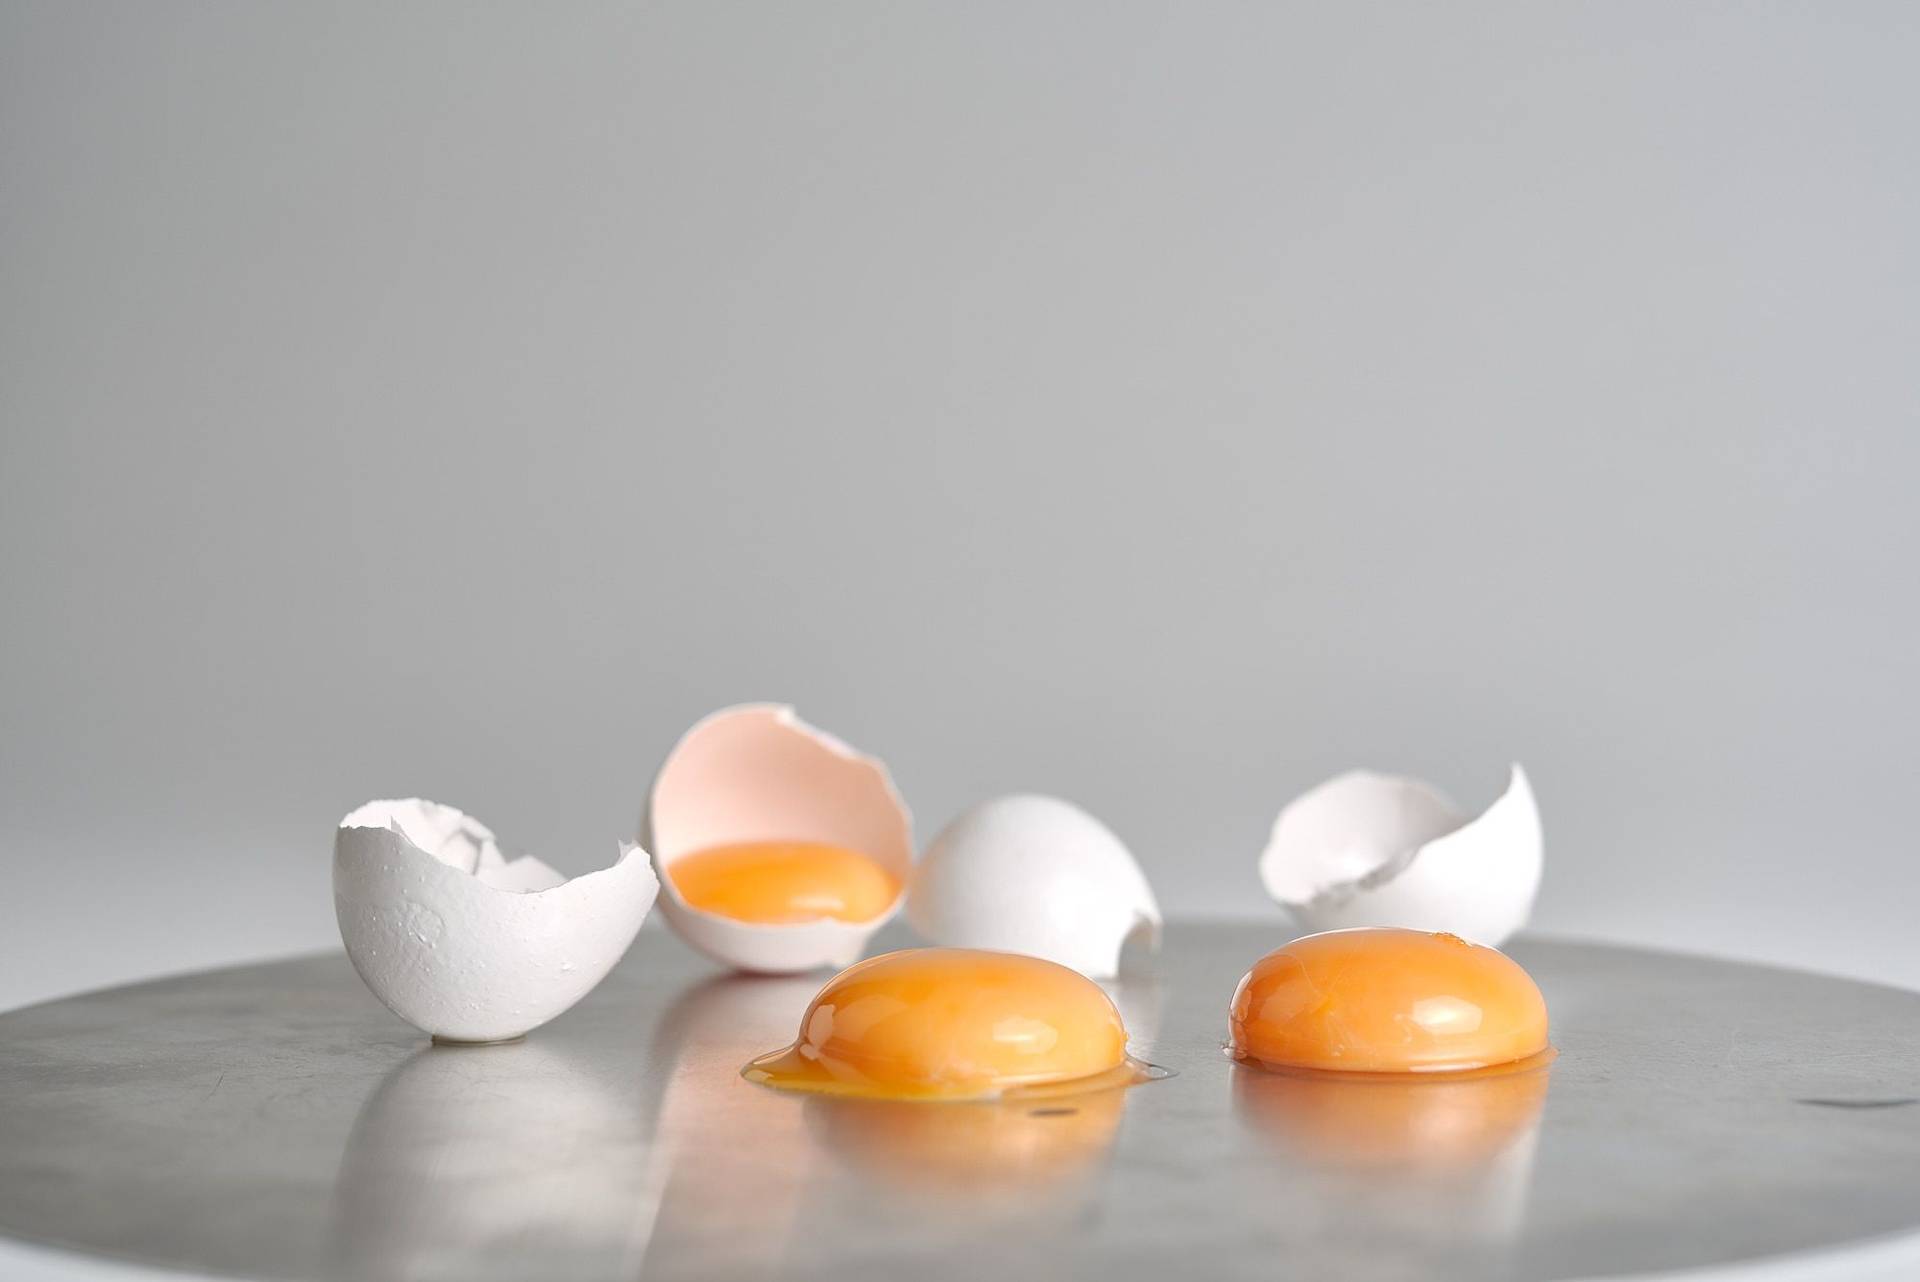 three egg yolks with egg shells on a cake plate with white background